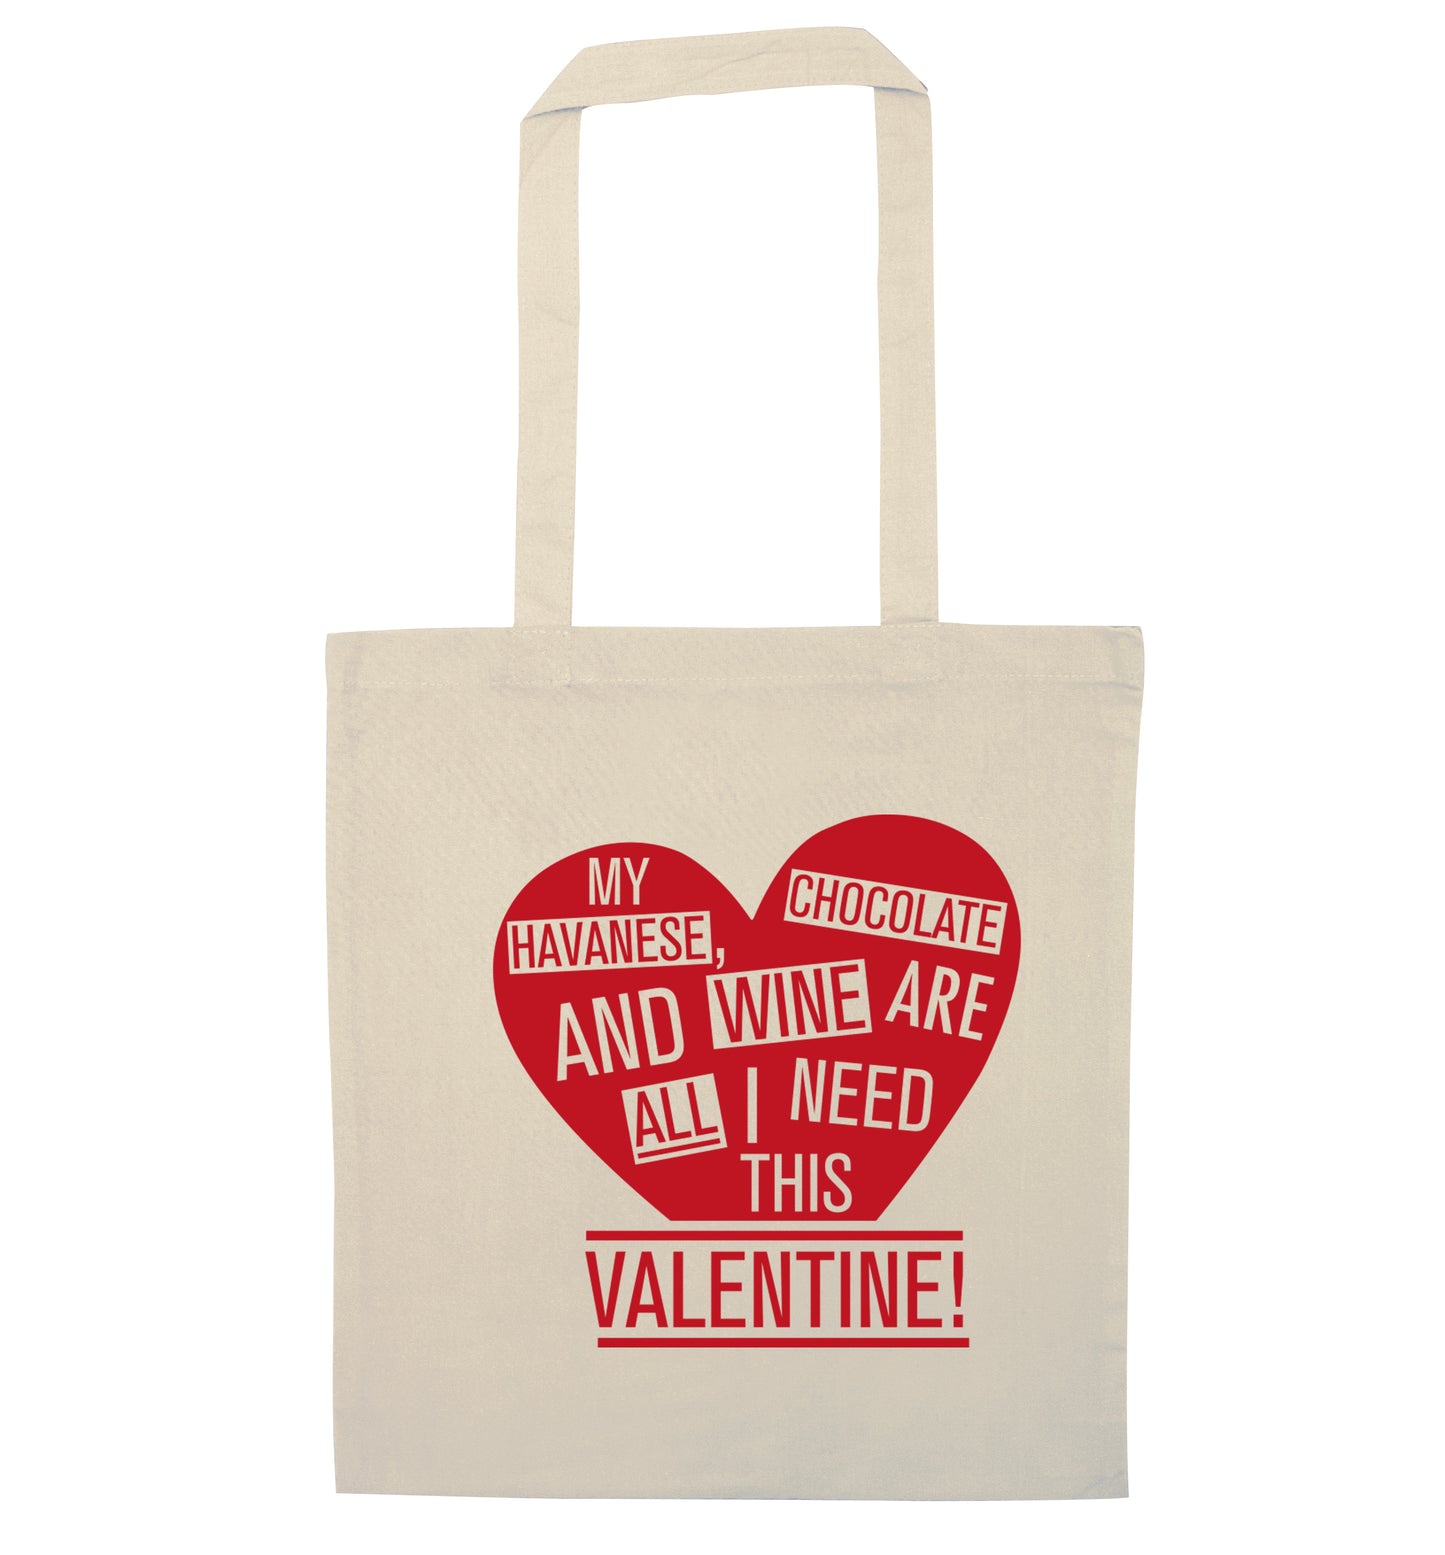 My havanese, chocolate and wine are all I need this valentine! natural tote bag